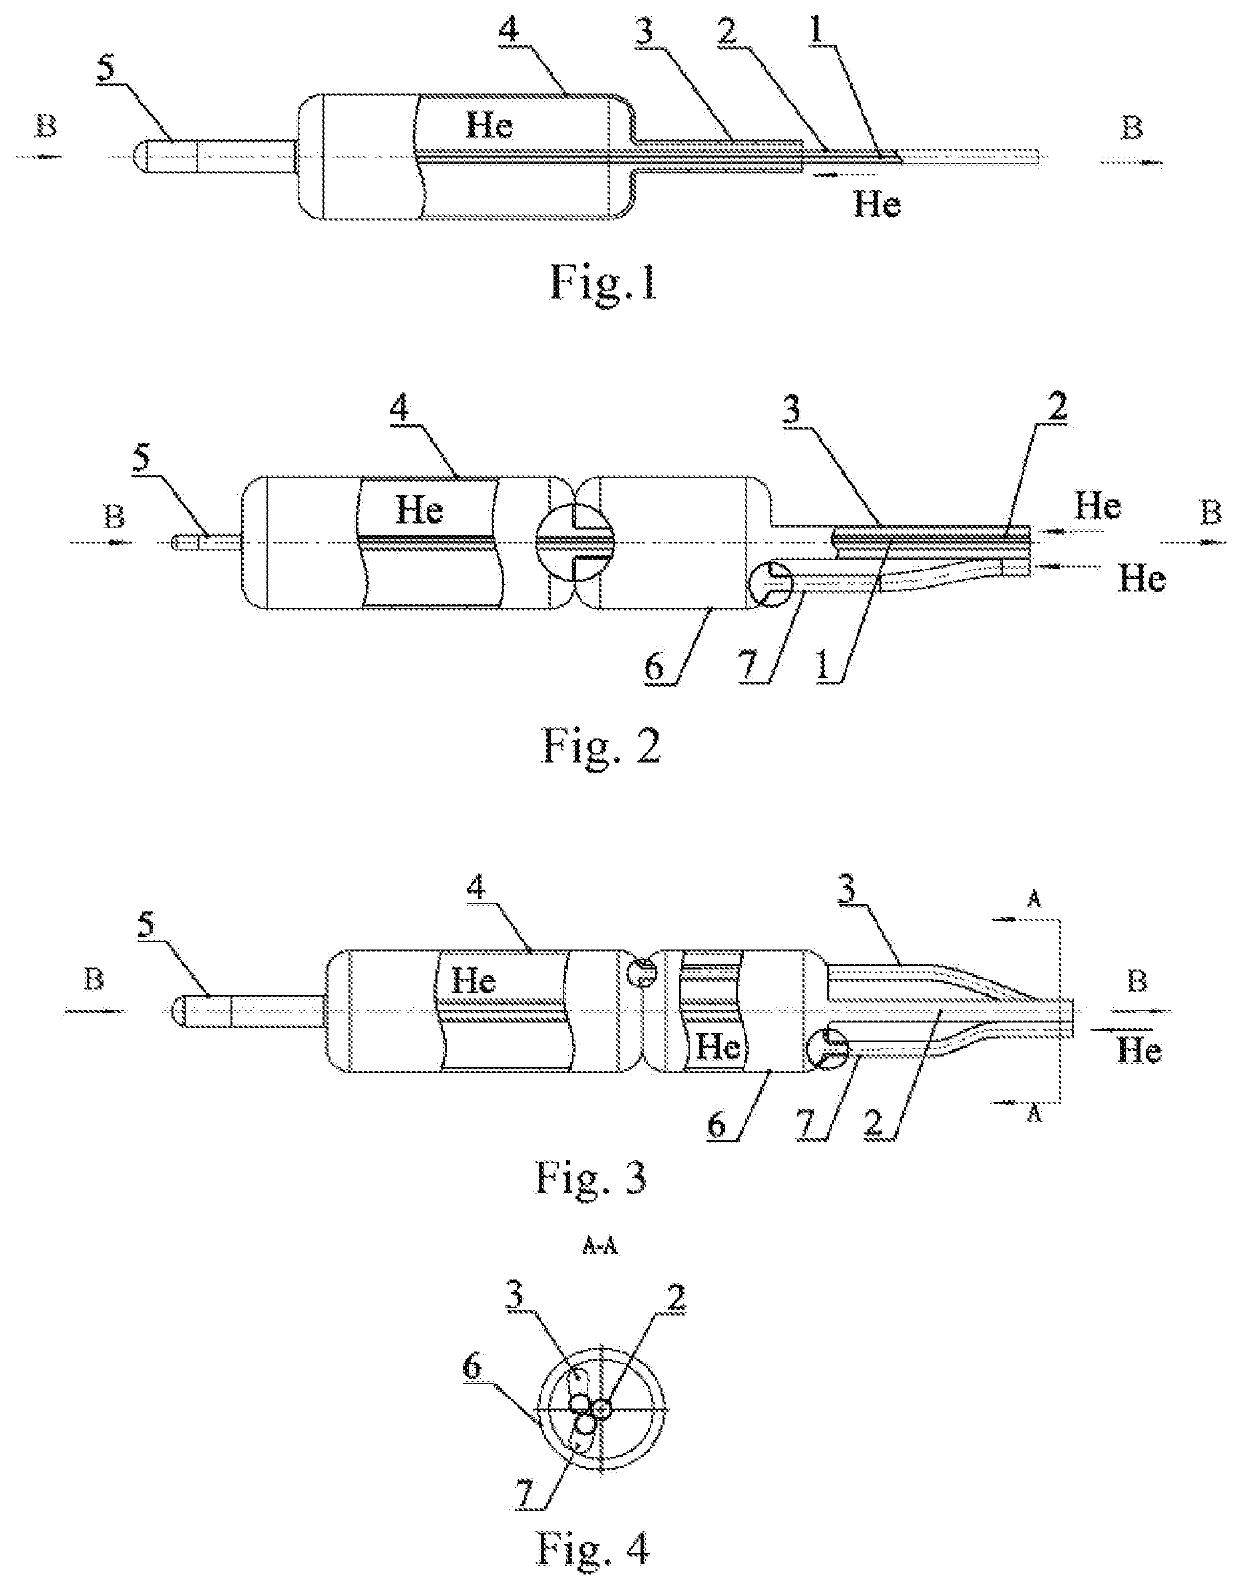 Intra-aortic dual balloon pump catheter device